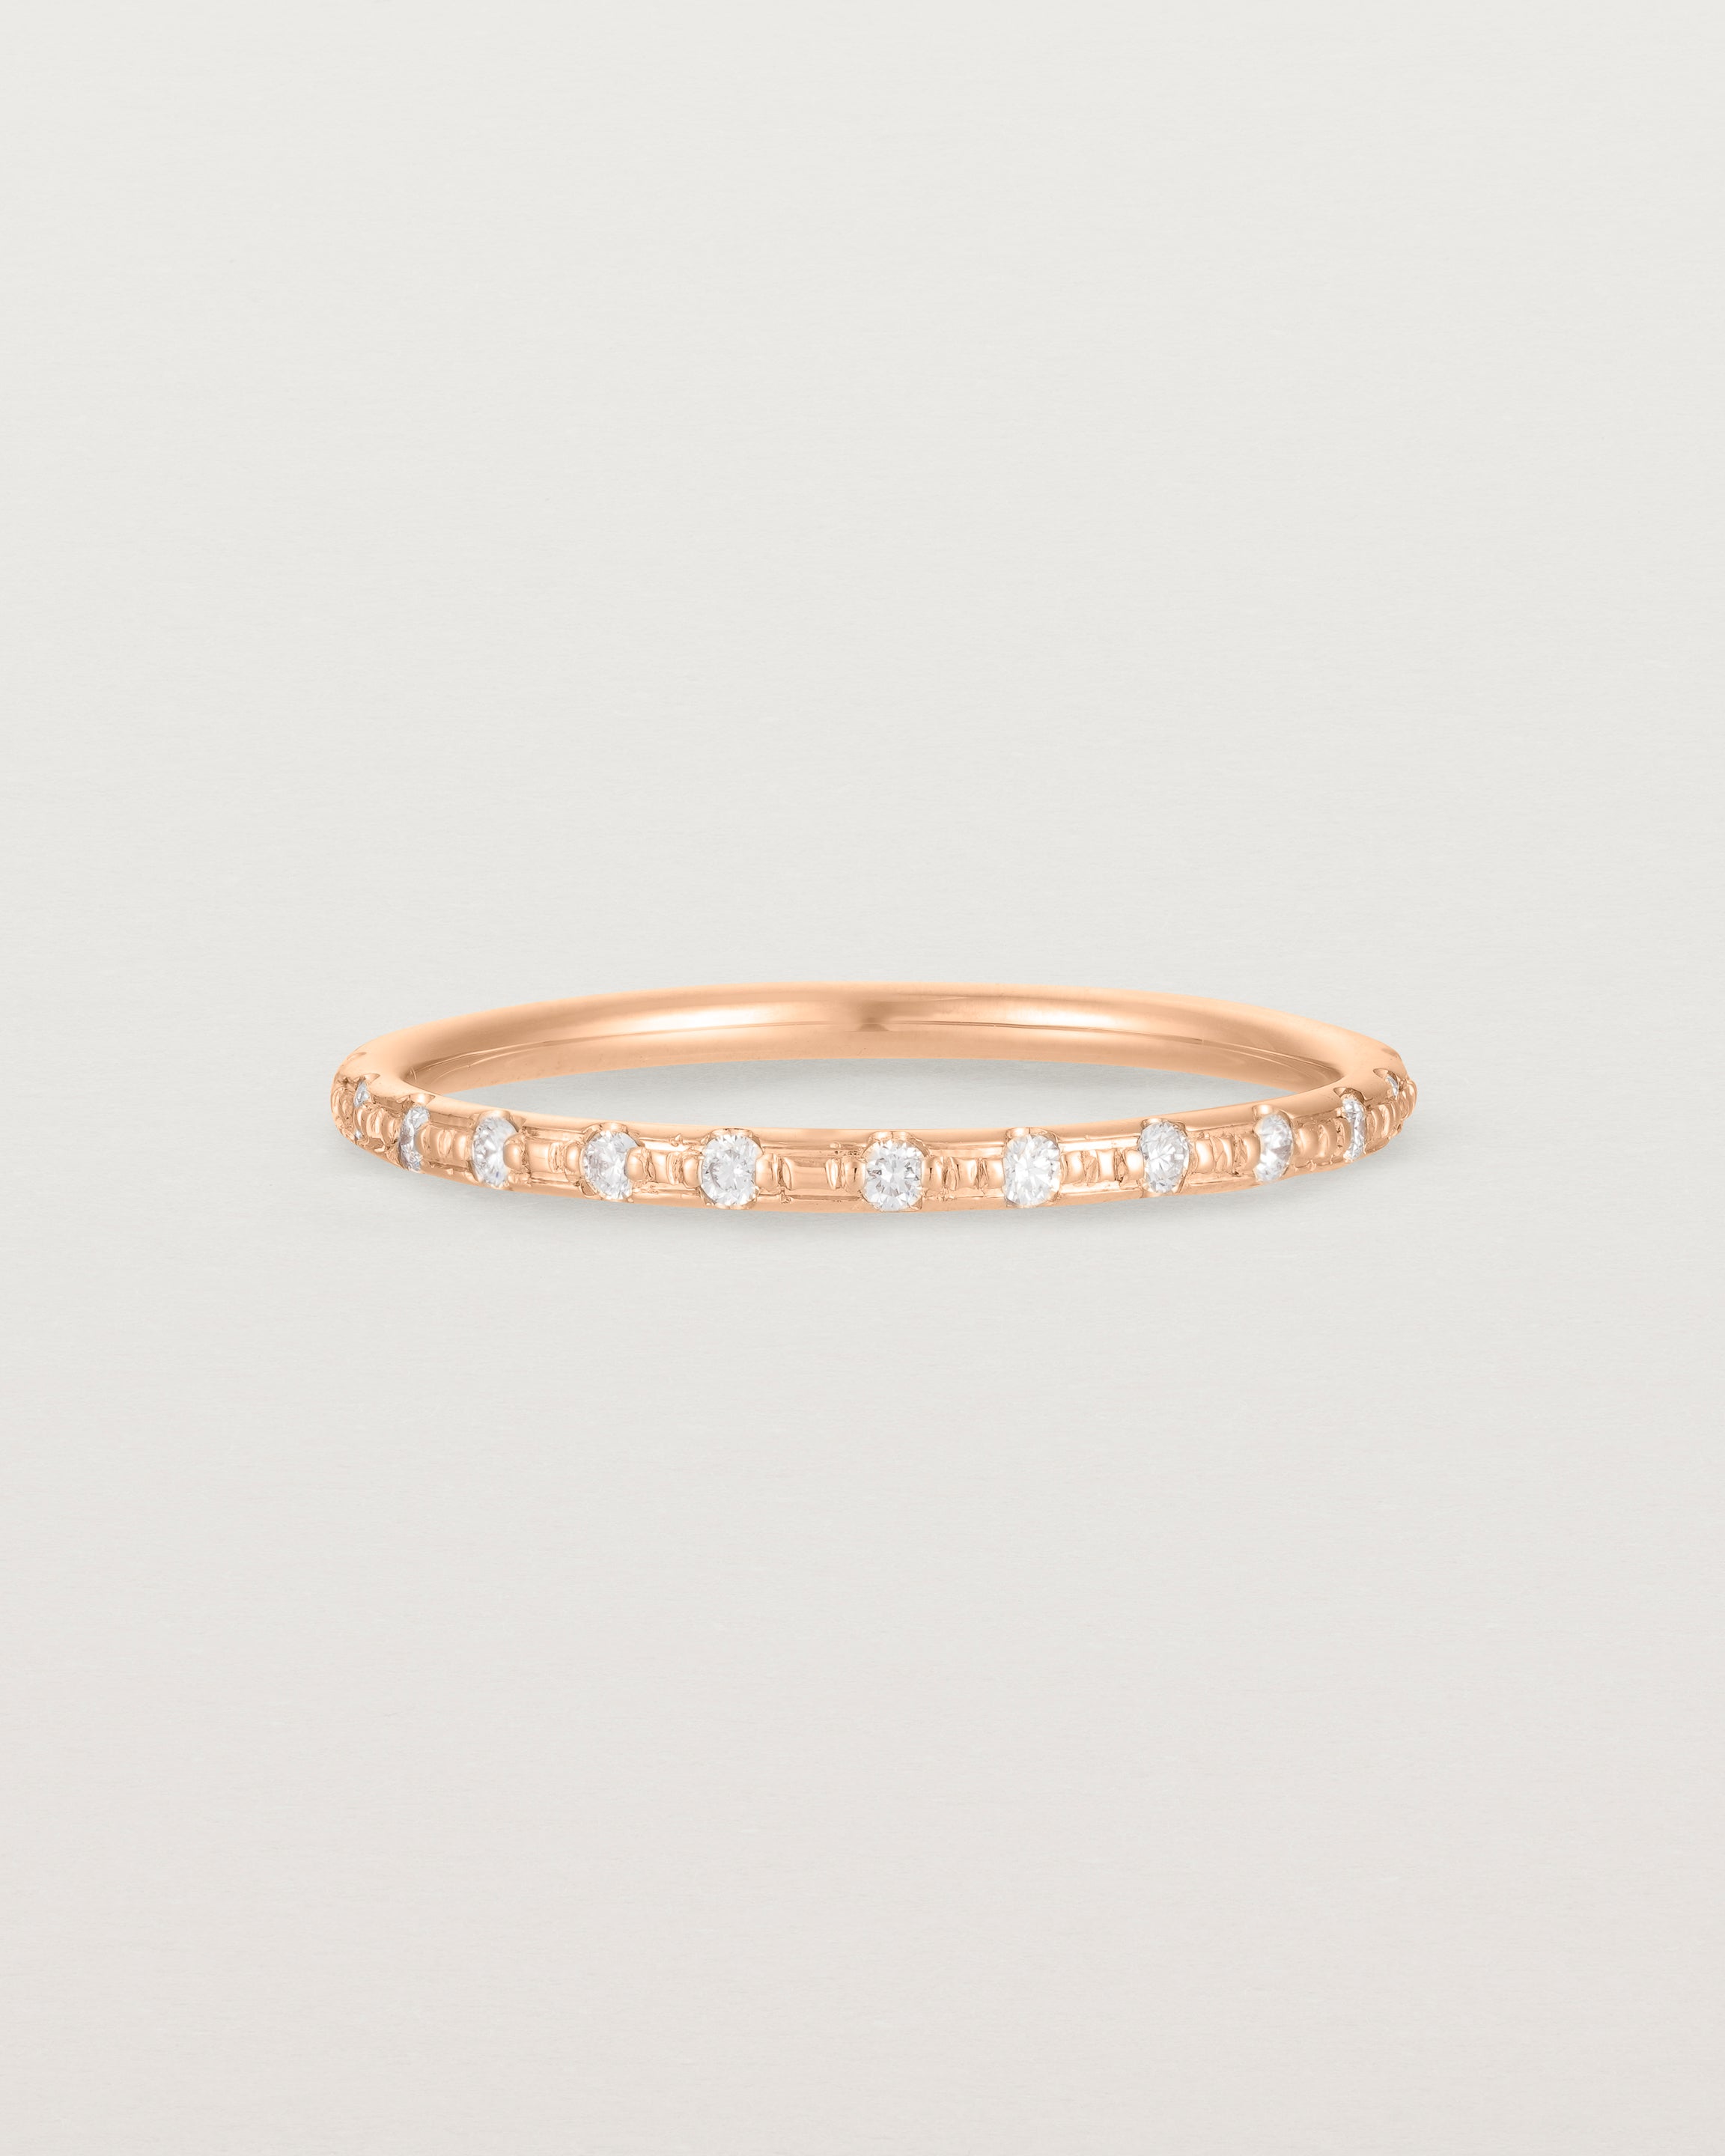 Front View of Cascade Round Profile Wedding Ring | Diamonds | Rose Gold